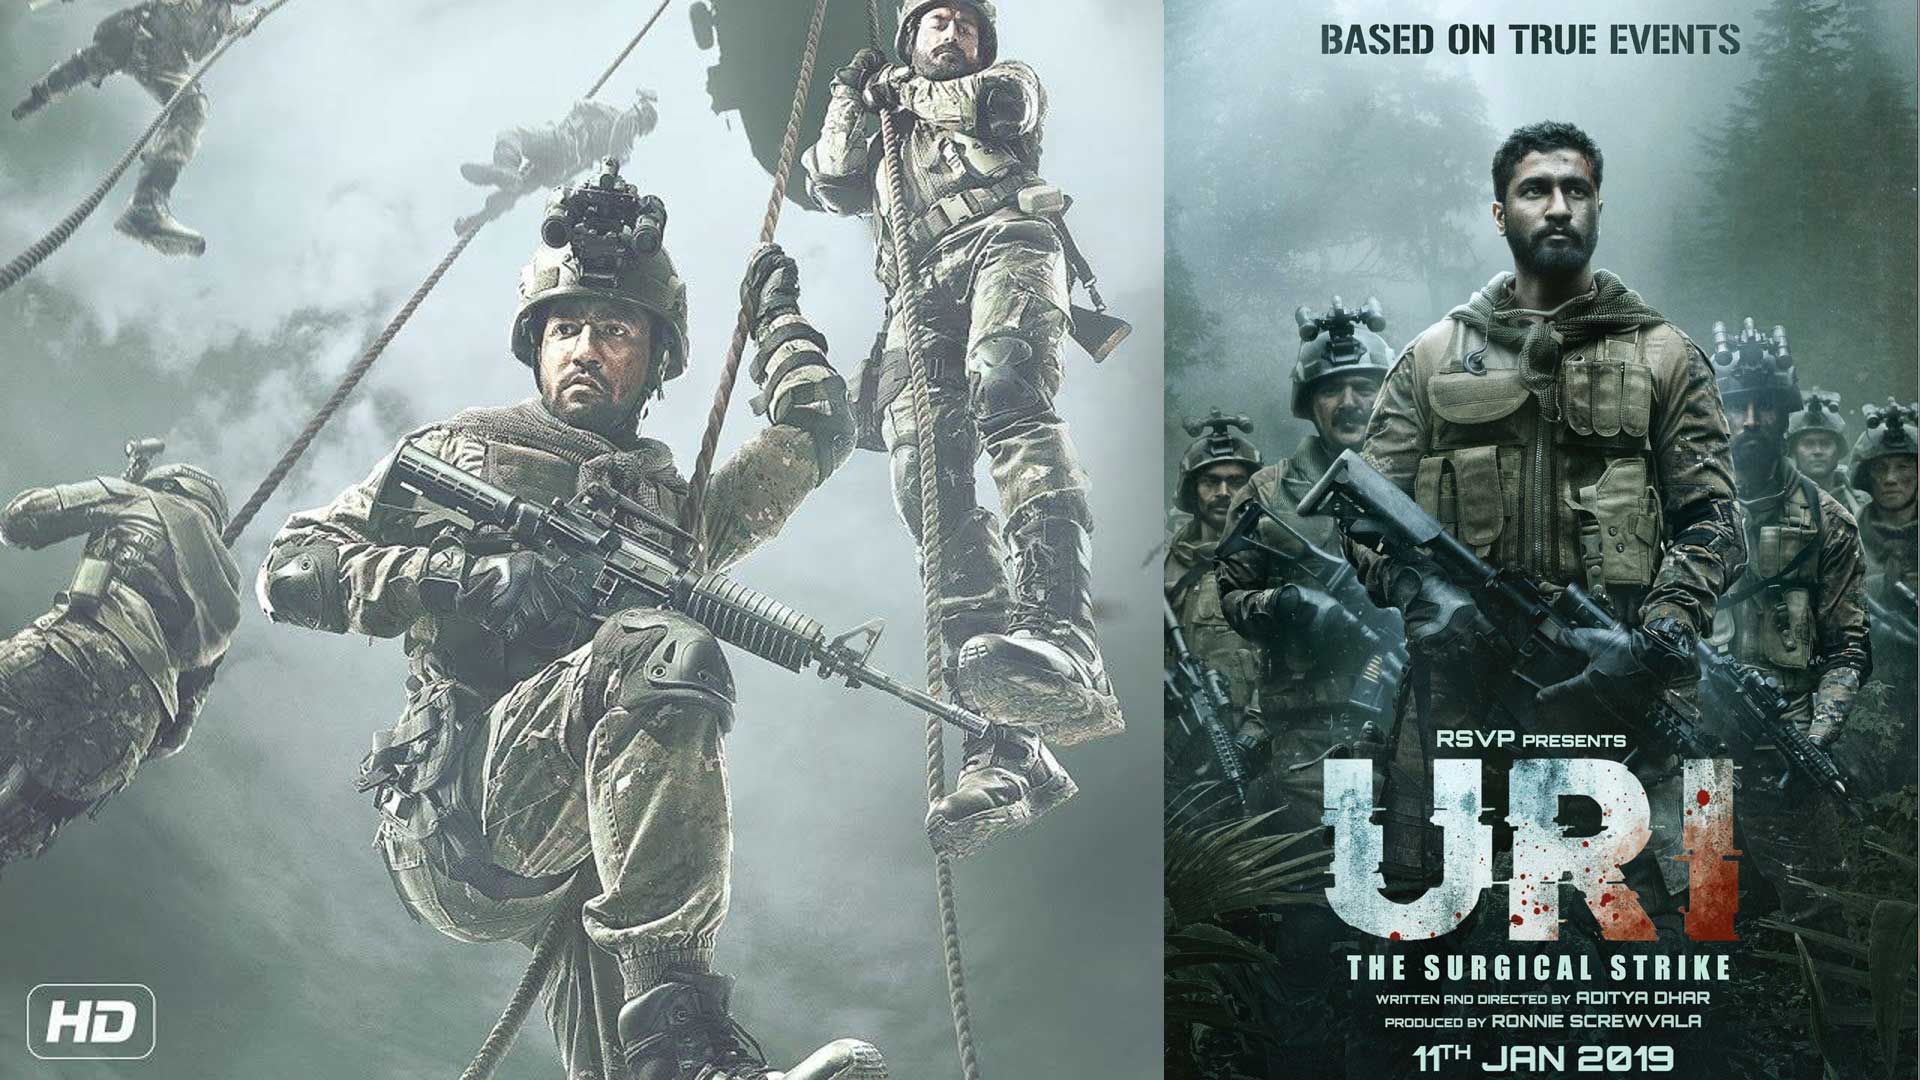 Vicky Kaushal and Team URI carry out a surgical strike on the ones who  downloaded the film from illegal torrent